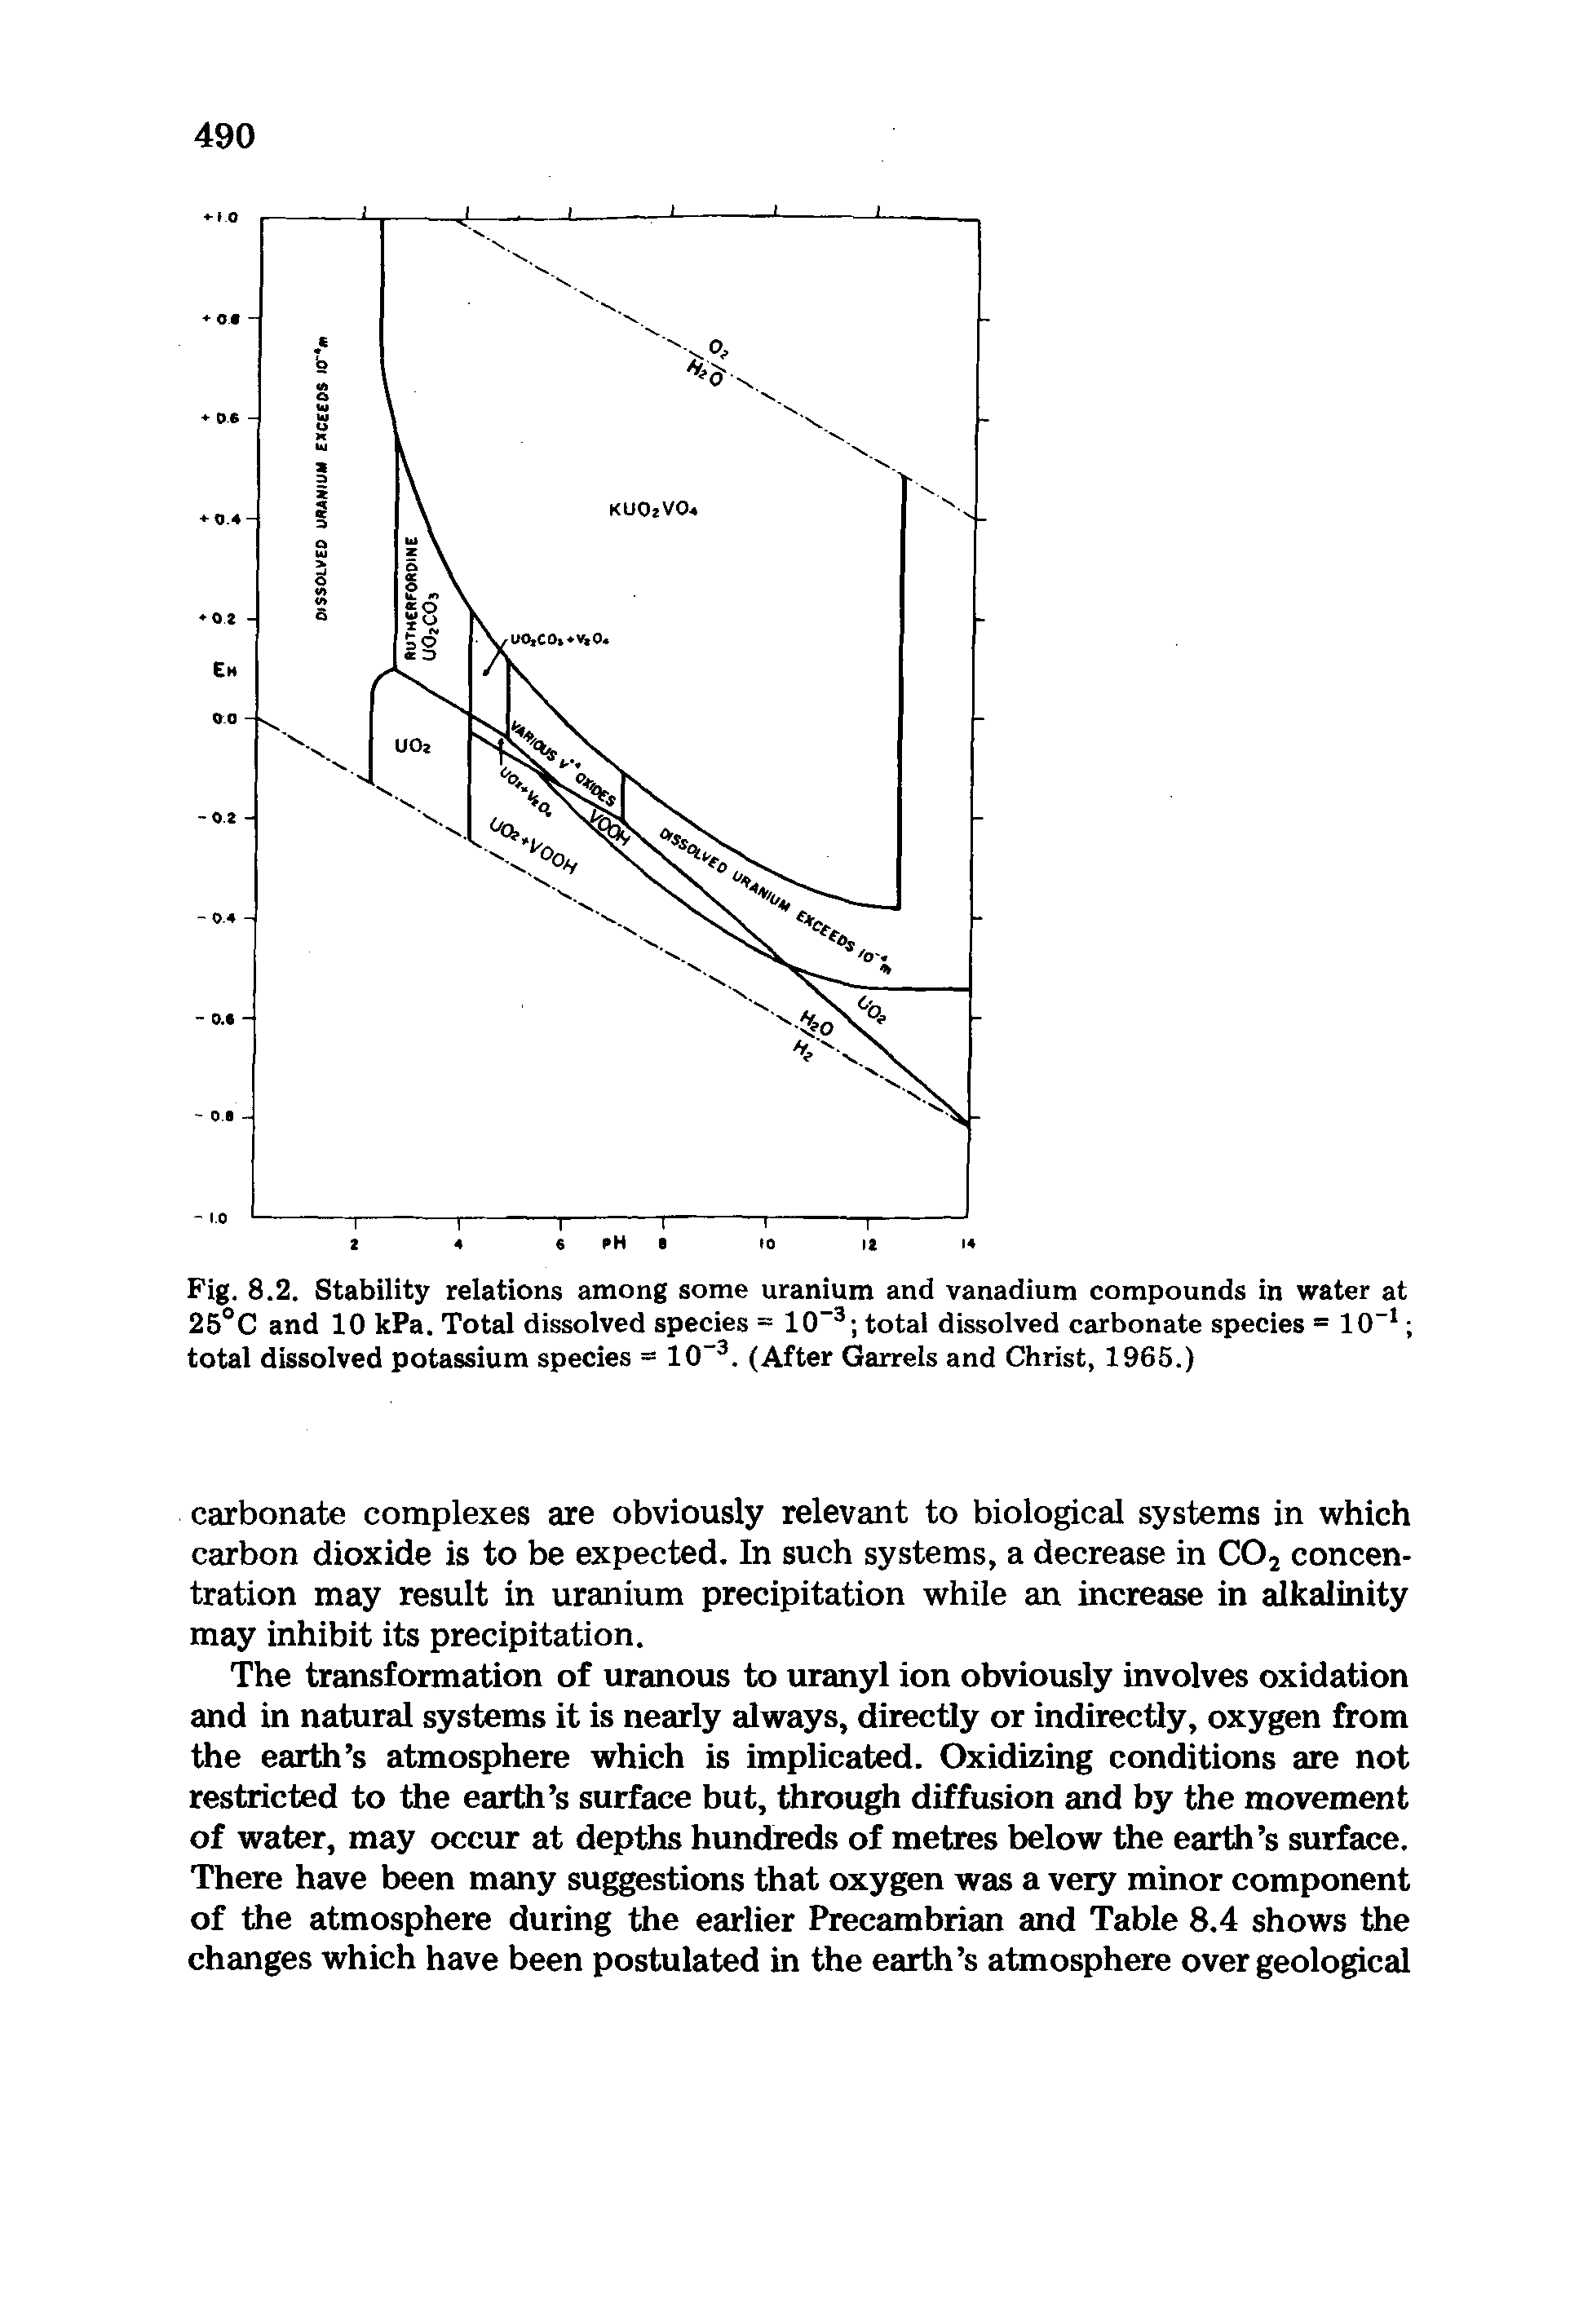 Fig. 8.2. Stability relations among some uranium and vanadium compounds in water at 25°C and 10 kPa. Total dissolved species = 10 total dissolved carbonate species = 10 total dissolved potassium species = 10 . (After Garrels and Christ, 1965.)...